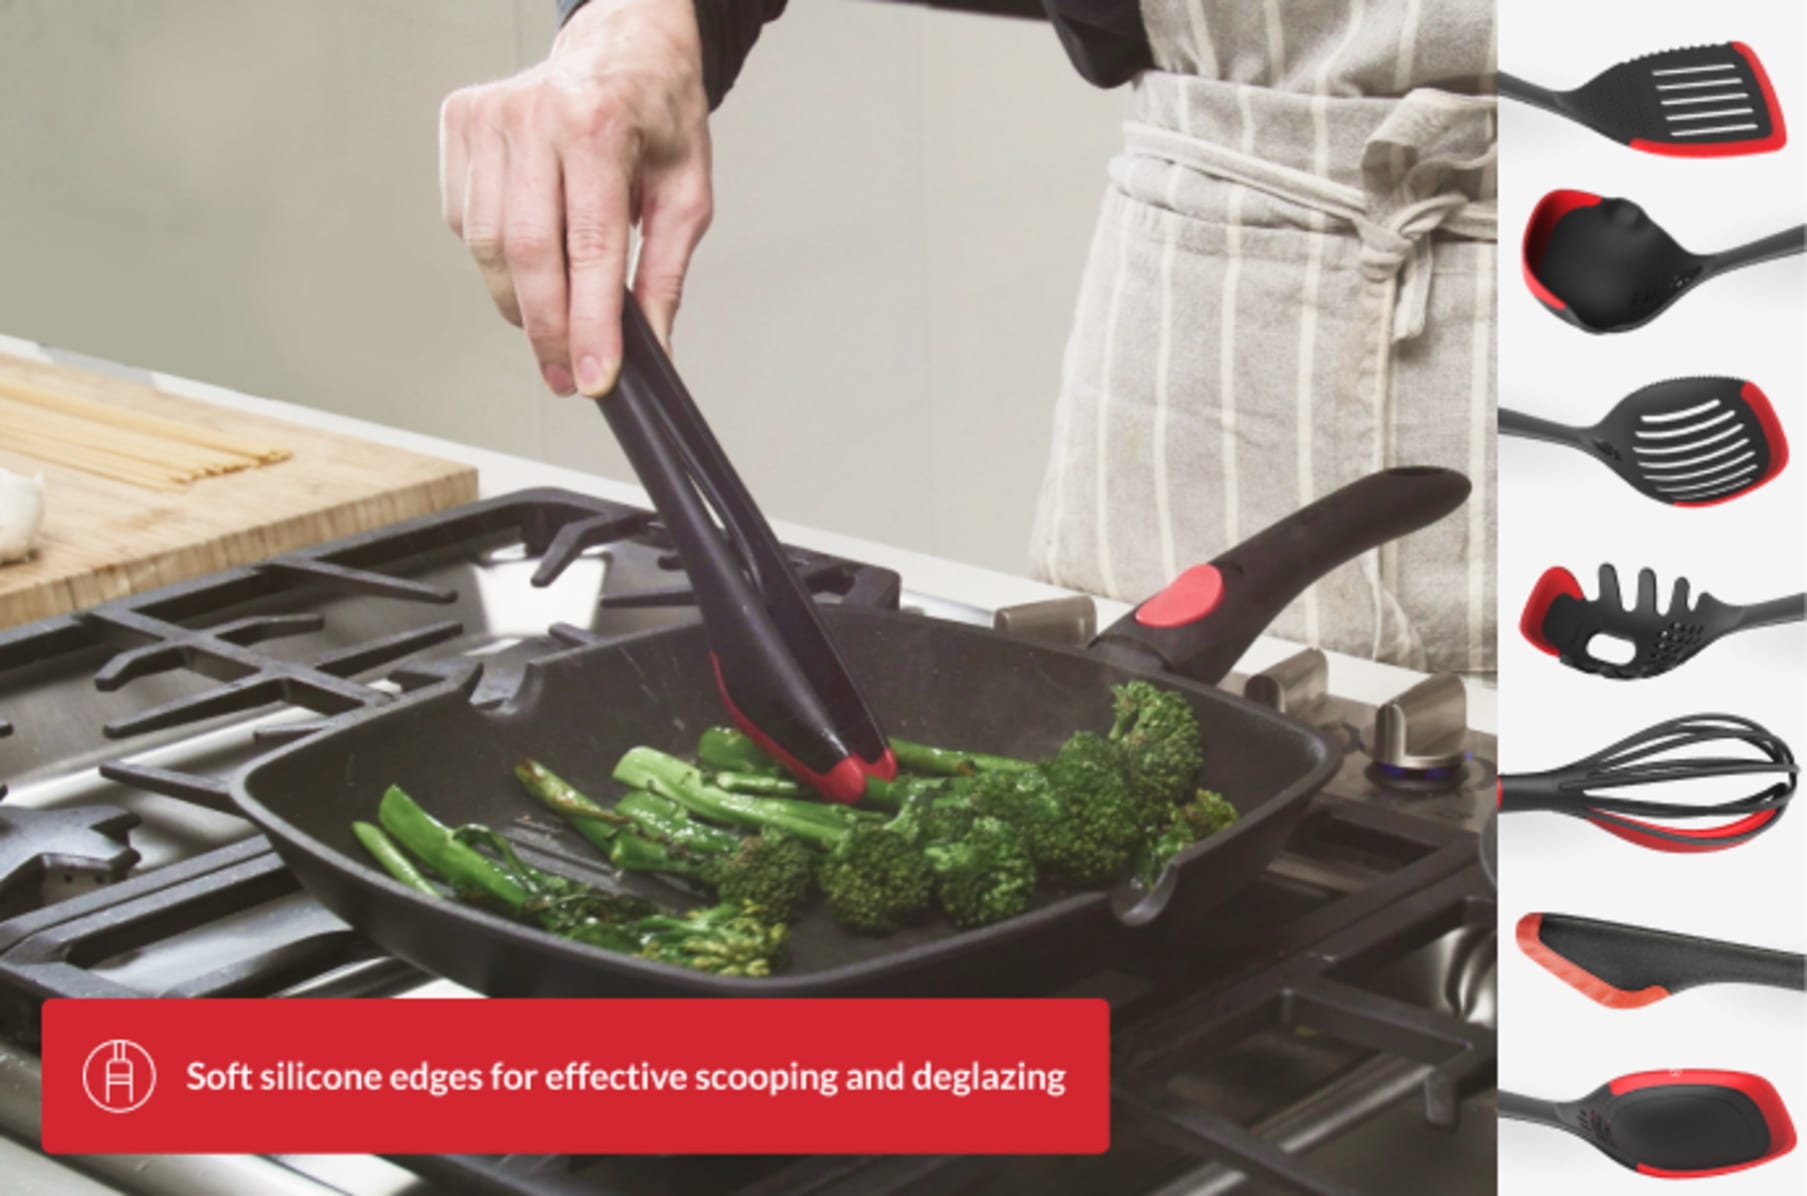 Top  Kitchen Gadgets Going Viral For Everyday Use - arinsolangeathome